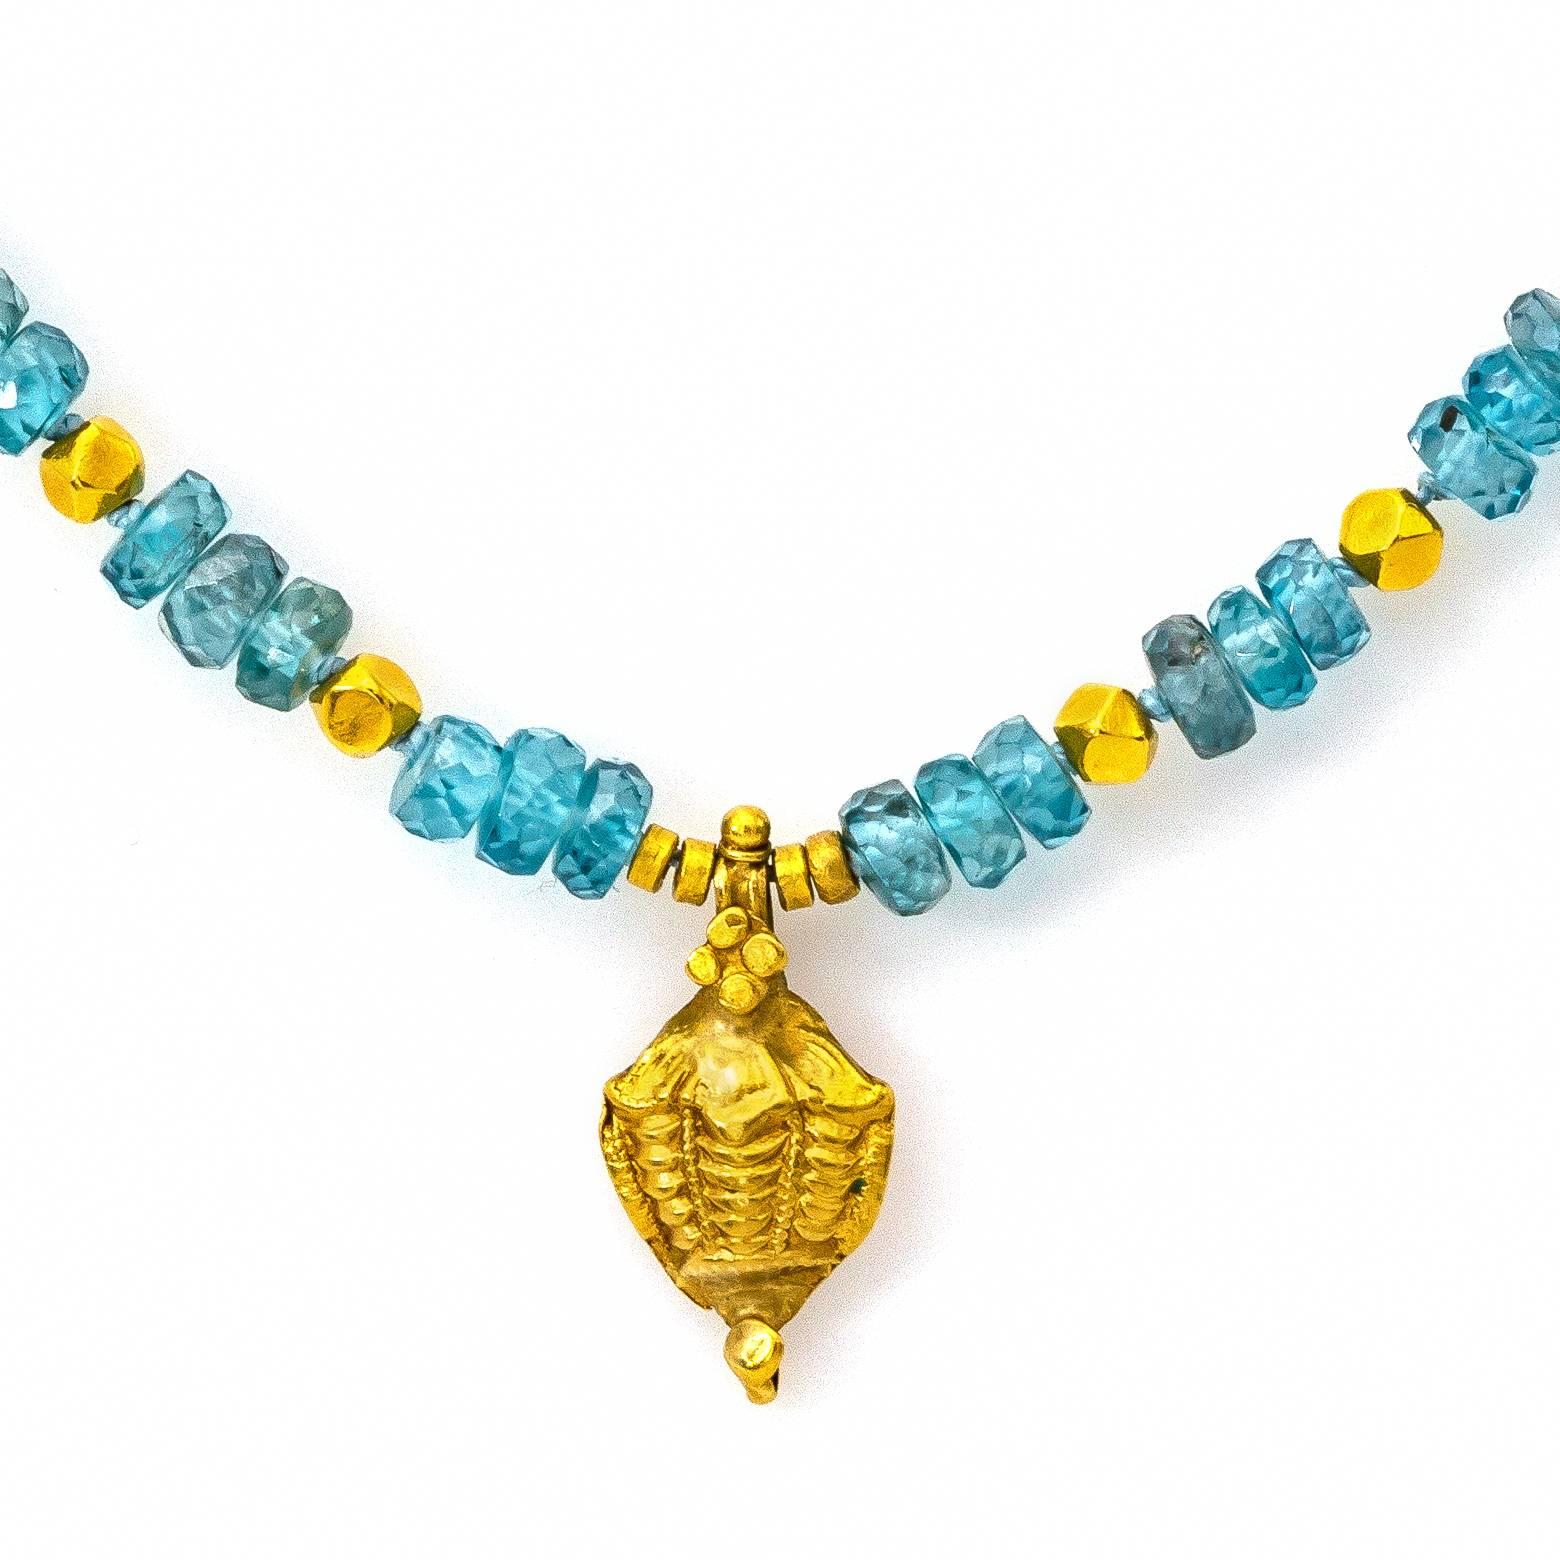 This stunning blue zircon hand knotted necklace is accented with 18k gold beads and a hand carved pendant that is a lovely delicate shape. The faceted  deep peacock stones sparkle and dazzle in any light to beautifully frame any neckline.The chain